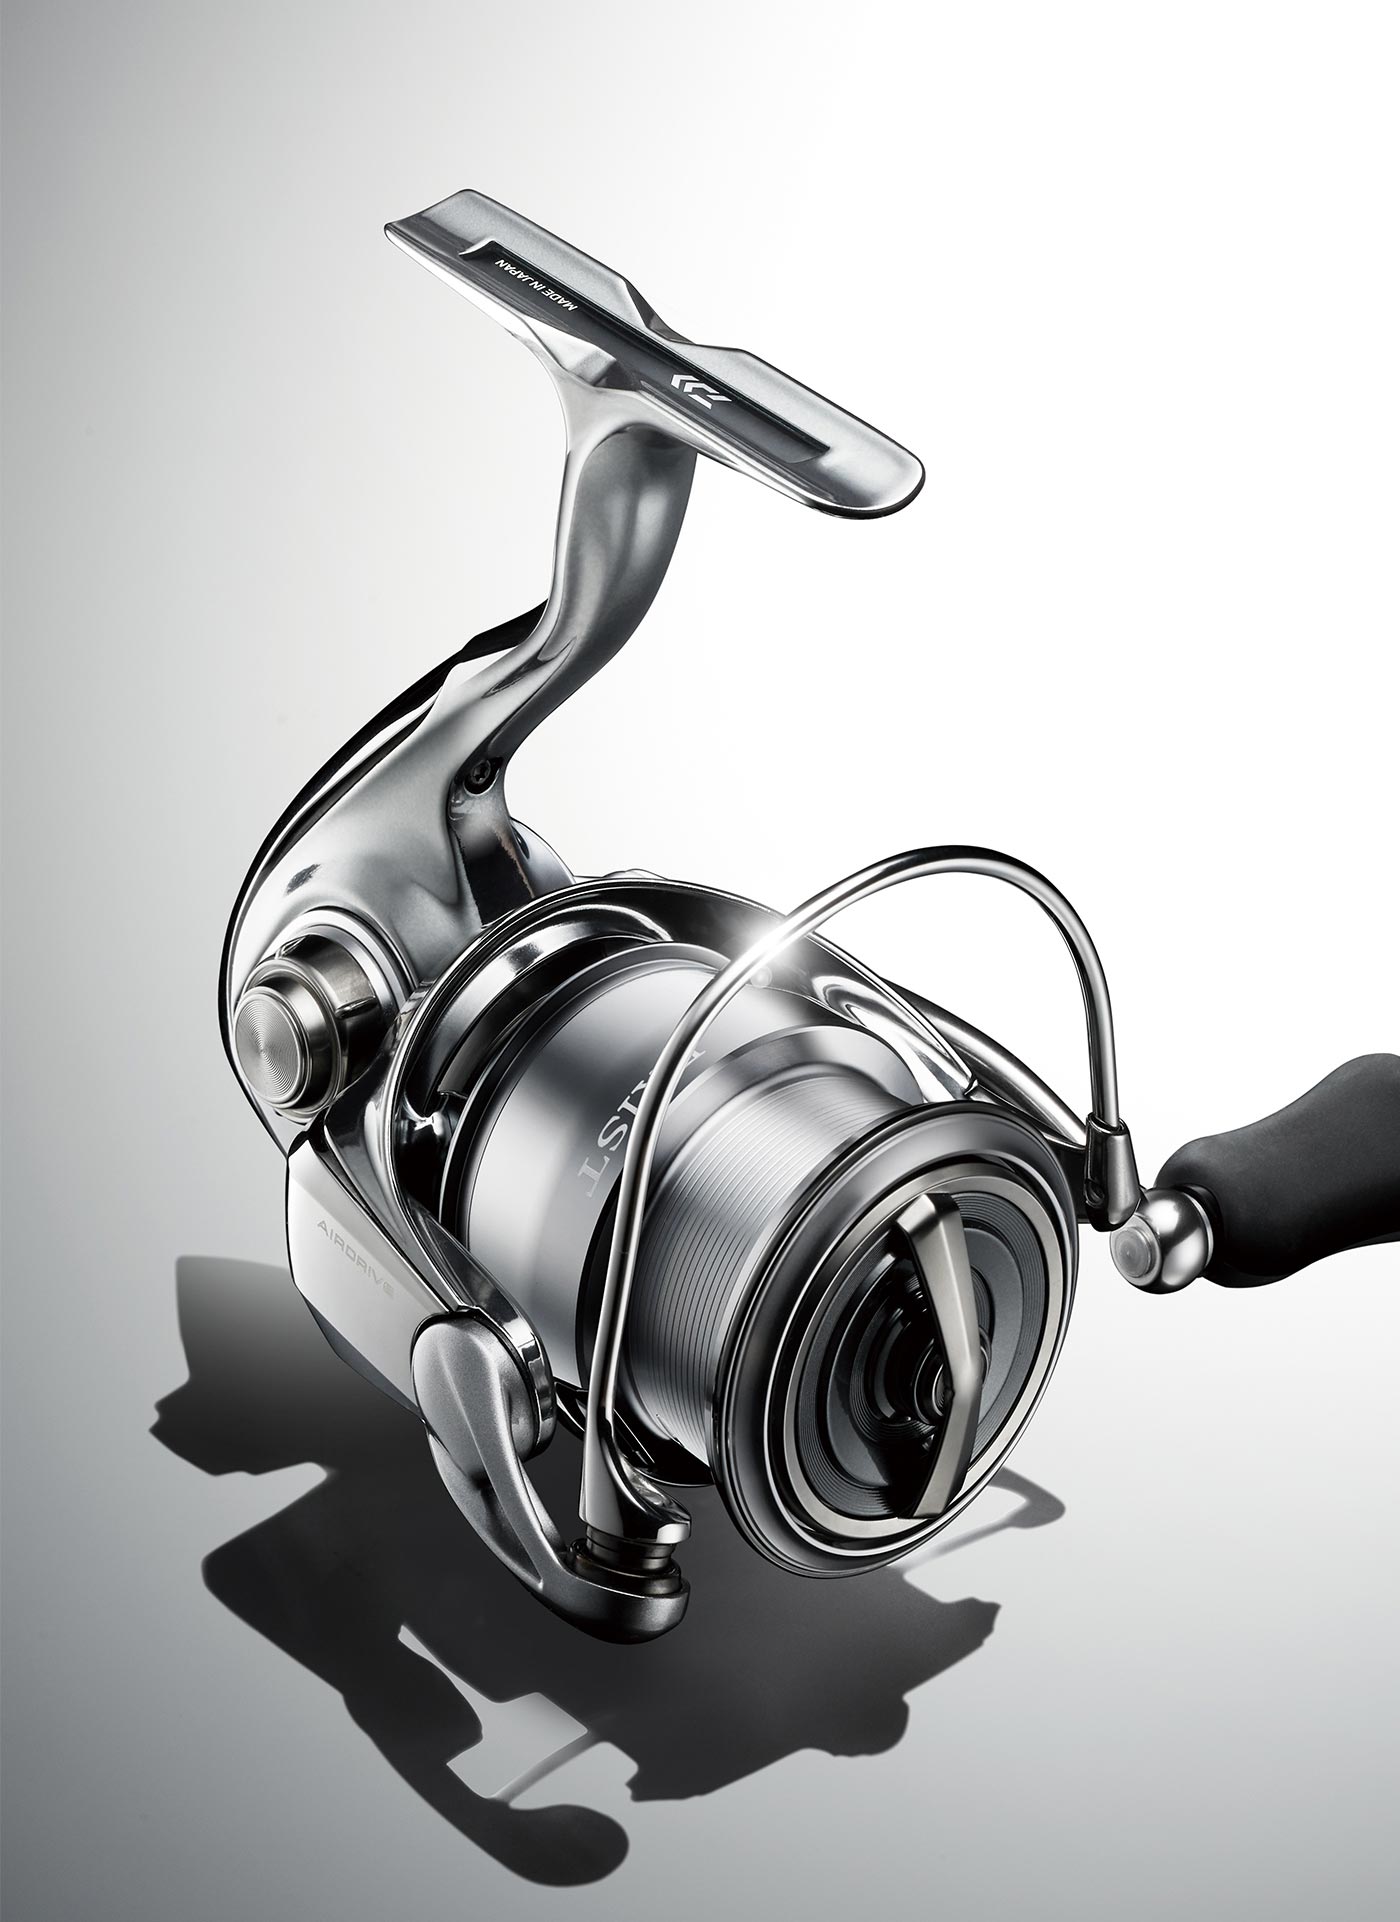 New Product: DAIWA's Flagship Spinning Reel Is Coming Back